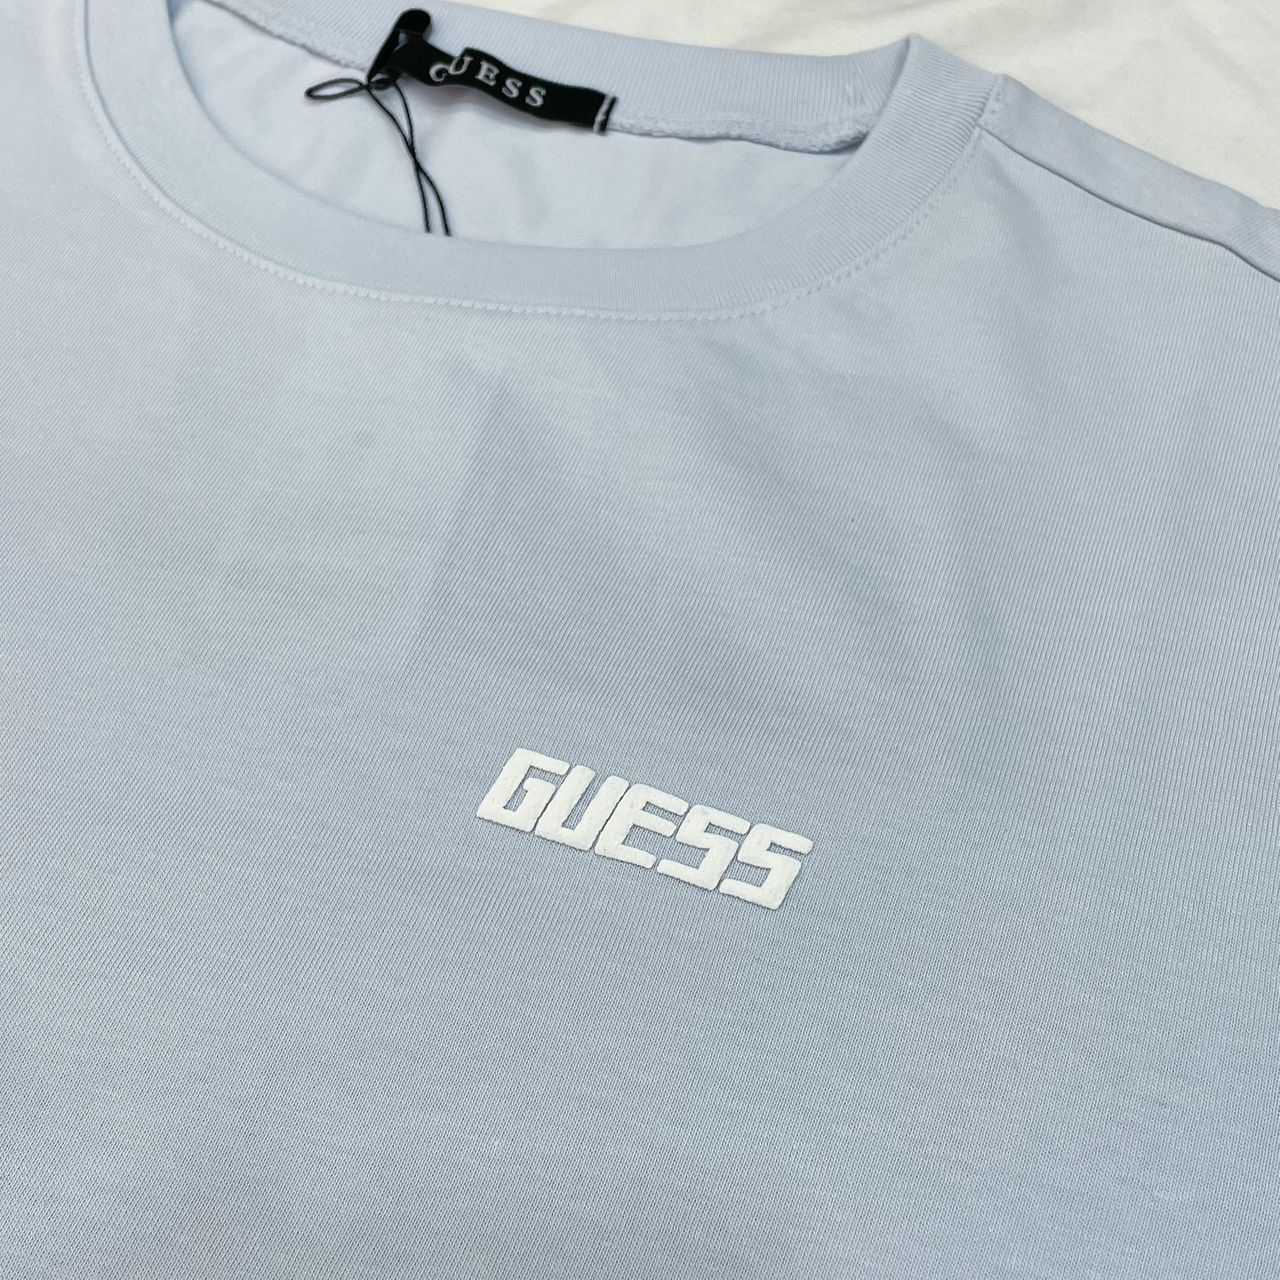 GUESS EMBROIDERED CHEST WORDING LOGO TEE - LIGHT BLUE